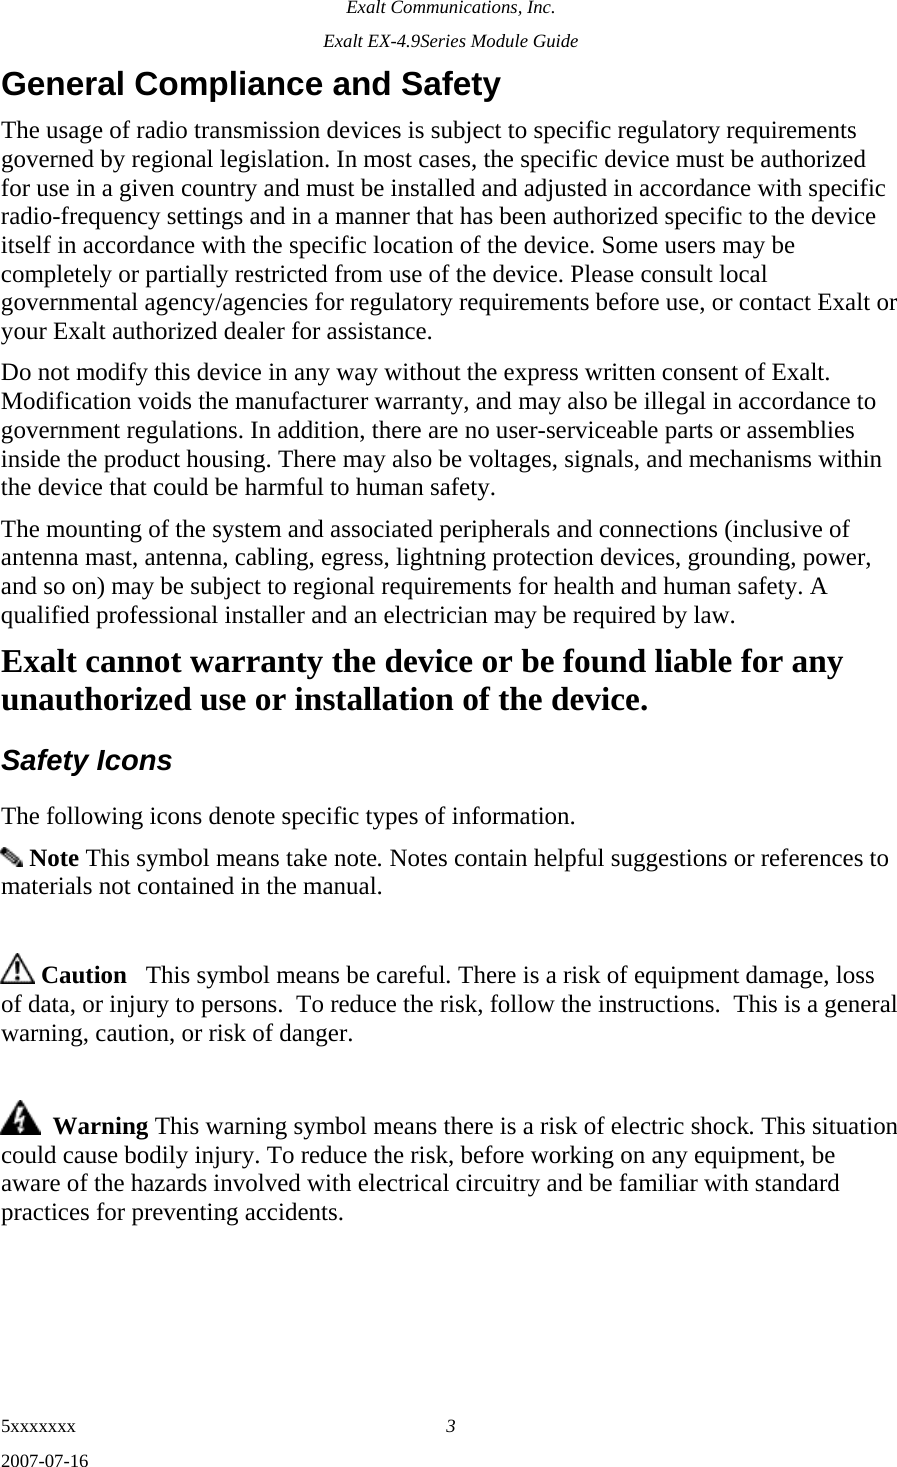 Exalt Communications, Inc. Exalt EX-4.9Series Module Guide 5xxxxxxx  3 2007-07-16 General Compliance and Safety The usage of radio transmission devices is subject to specific regulatory requirements governed by regional legislation. In most cases, the specific device must be authorized for use in a given country and must be installed and adjusted in accordance with specific radio-frequency settings and in a manner that has been authorized specific to the device itself in accordance with the specific location of the device. Some users may be completely or partially restricted from use of the device. Please consult local governmental agency/agencies for regulatory requirements before use, or contact Exalt or your Exalt authorized dealer for assistance. Do not modify this device in any way without the express written consent of Exalt. Modification voids the manufacturer warranty, and may also be illegal in accordance to government regulations. In addition, there are no user-serviceable parts or assemblies inside the product housing. There may also be voltages, signals, and mechanisms within the device that could be harmful to human safety. The mounting of the system and associated peripherals and connections (inclusive of antenna mast, antenna, cabling, egress, lightning protection devices, grounding, power, and so on) may be subject to regional requirements for health and human safety. A qualified professional installer and an electrician may be required by law. Exalt cannot warranty the device or be found liable for any unauthorized use or installation of the device. Safety Icons   The following icons denote specific types of information.  Note This symbol means take note. Notes contain helpful suggestions or references to materials not contained in the manual.   Caution   This symbol means be careful. There is a risk of equipment damage, loss of data, or injury to persons.  To reduce the risk, follow the instructions.  This is a general warning, caution, or risk of danger.    Warning This warning symbol means there is a risk of electric shock. This situation could cause bodily injury. To reduce the risk, before working on any equipment, be aware of the hazards involved with electrical circuitry and be familiar with standard practices for preventing accidents.    